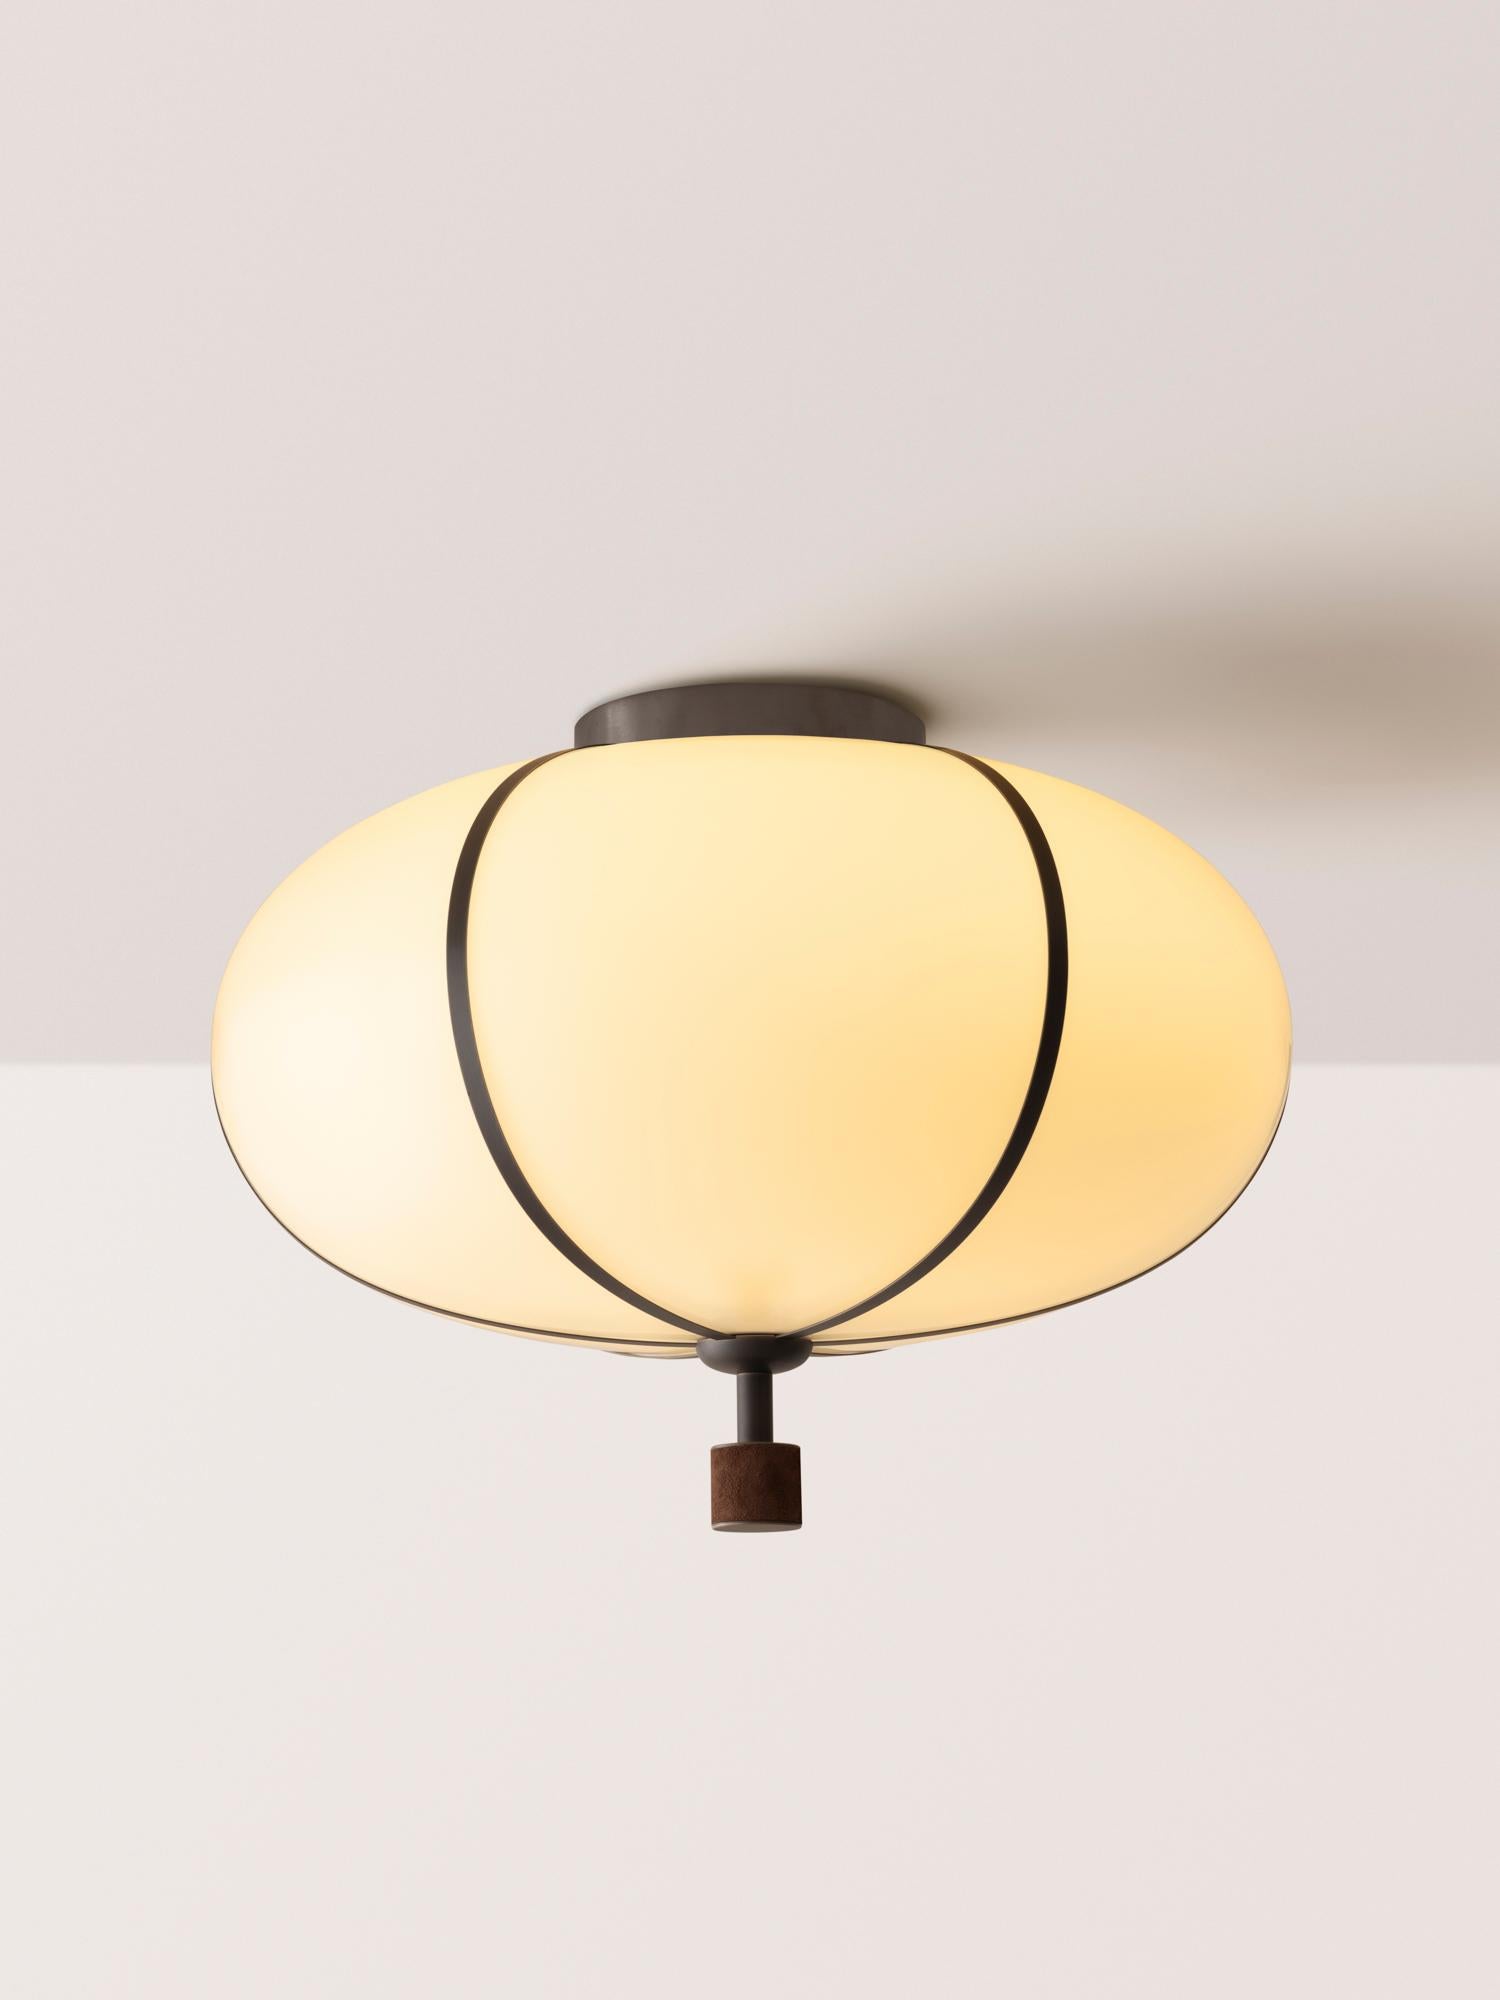 Rib Flush Mount - Large Ellipse in Oil-Rubbed Bronze In New Condition For Sale In New York, NY